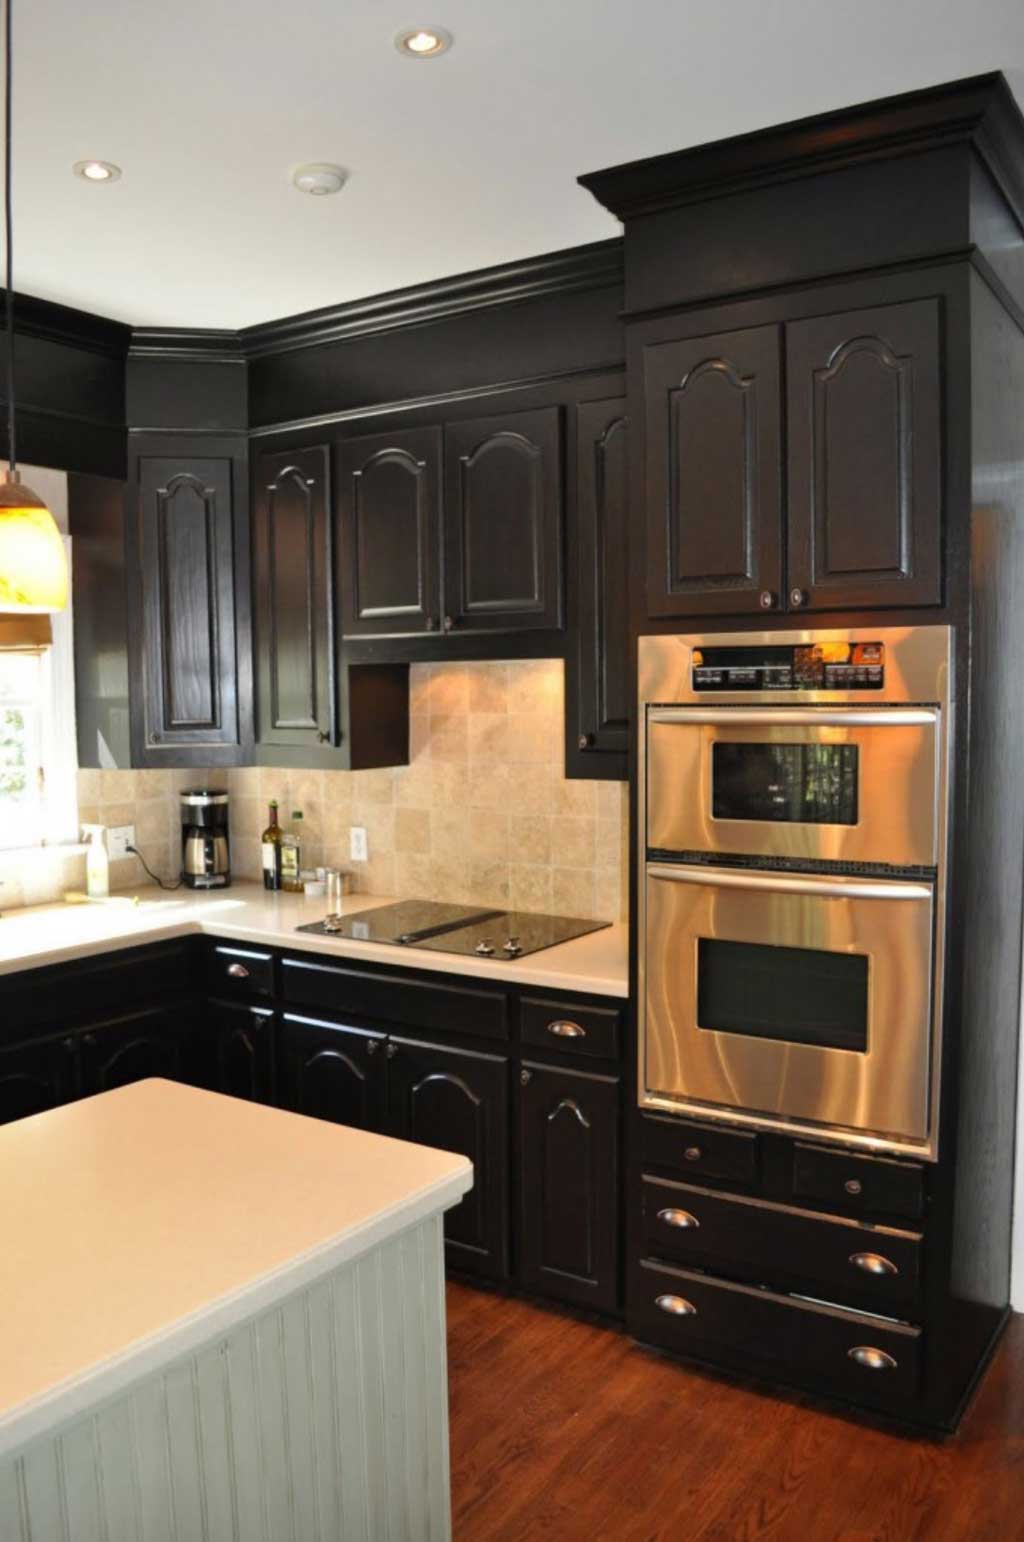 Kitchen Remodel Deluxe Fetching Kitchen Remodel Ideas With Deluxe Black Cabinets Design And Astonishing White Countertop Idea Also Interesting Solid White Granite Top Kitchen Island Cart Design Kitchen Most Popular Kitchen Layout To Emulate Your Own After